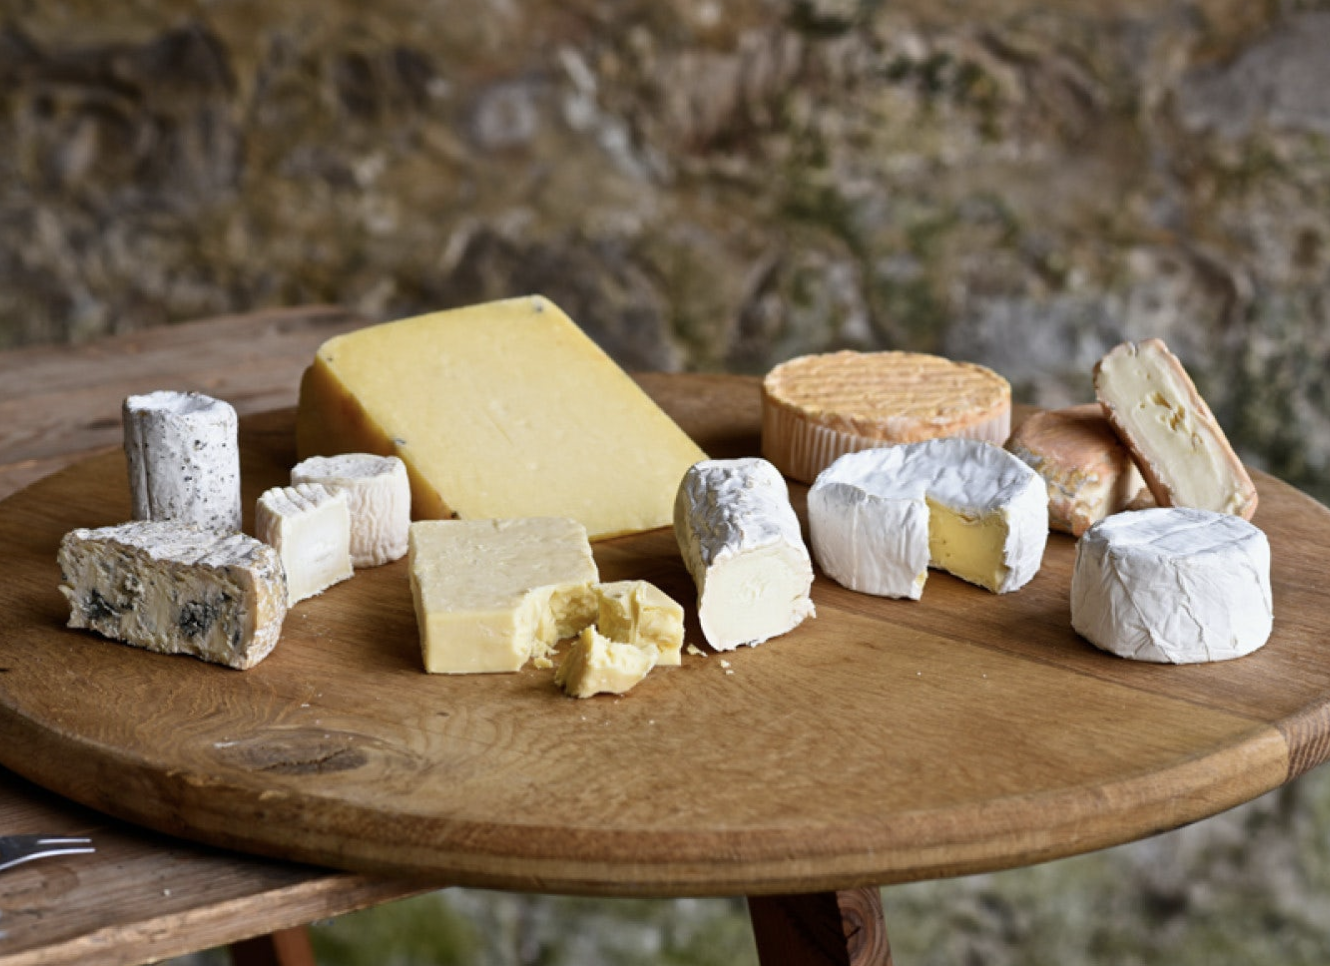 Selection of cheeses at The Beckford Arms, Wiltshire